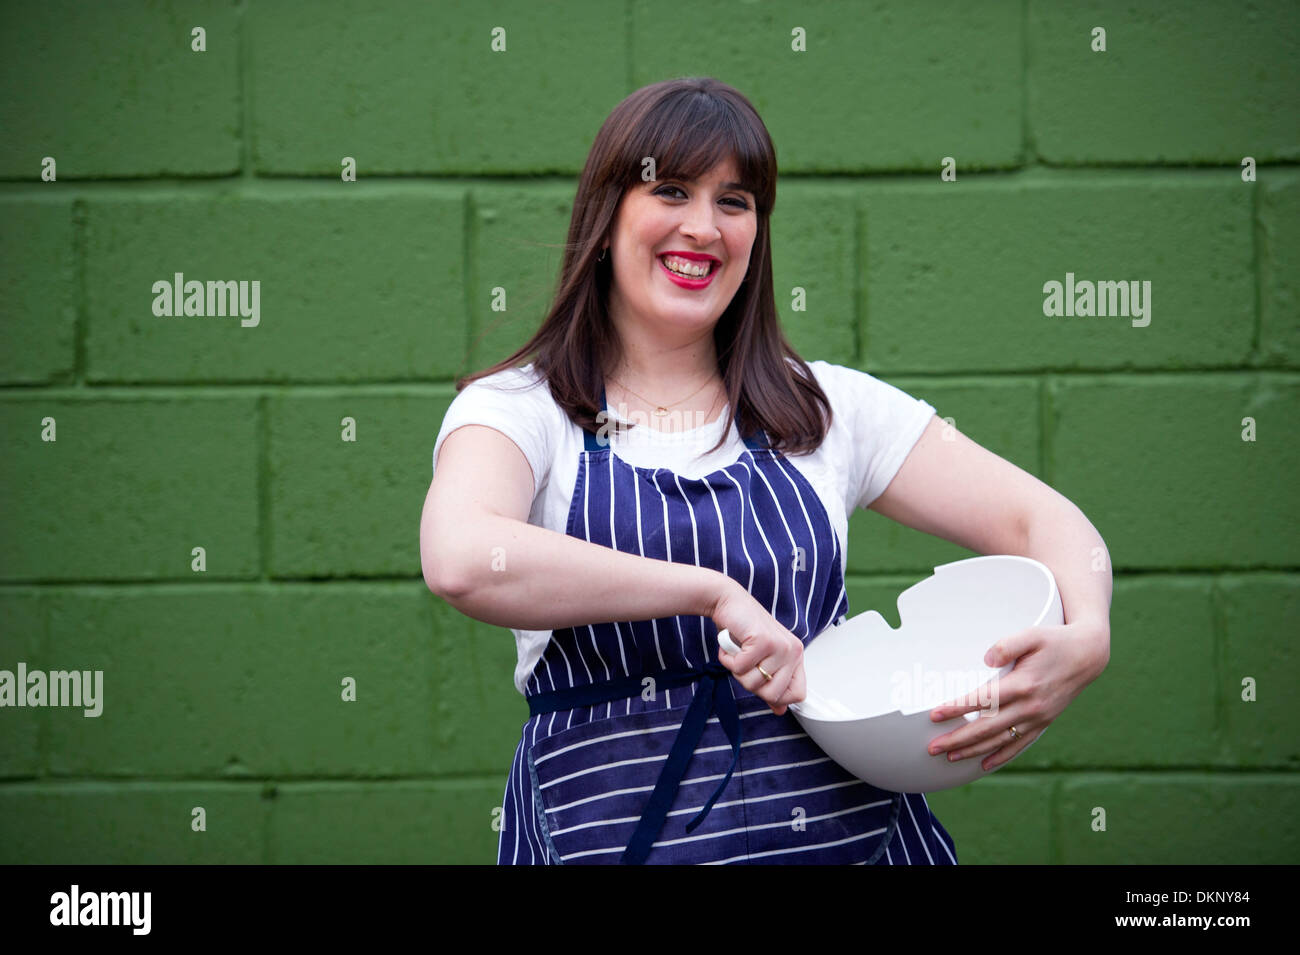 Beca Lyne-Perkis who was a contestant on the Great British Bake Off television series on BBC2. Stock Photo